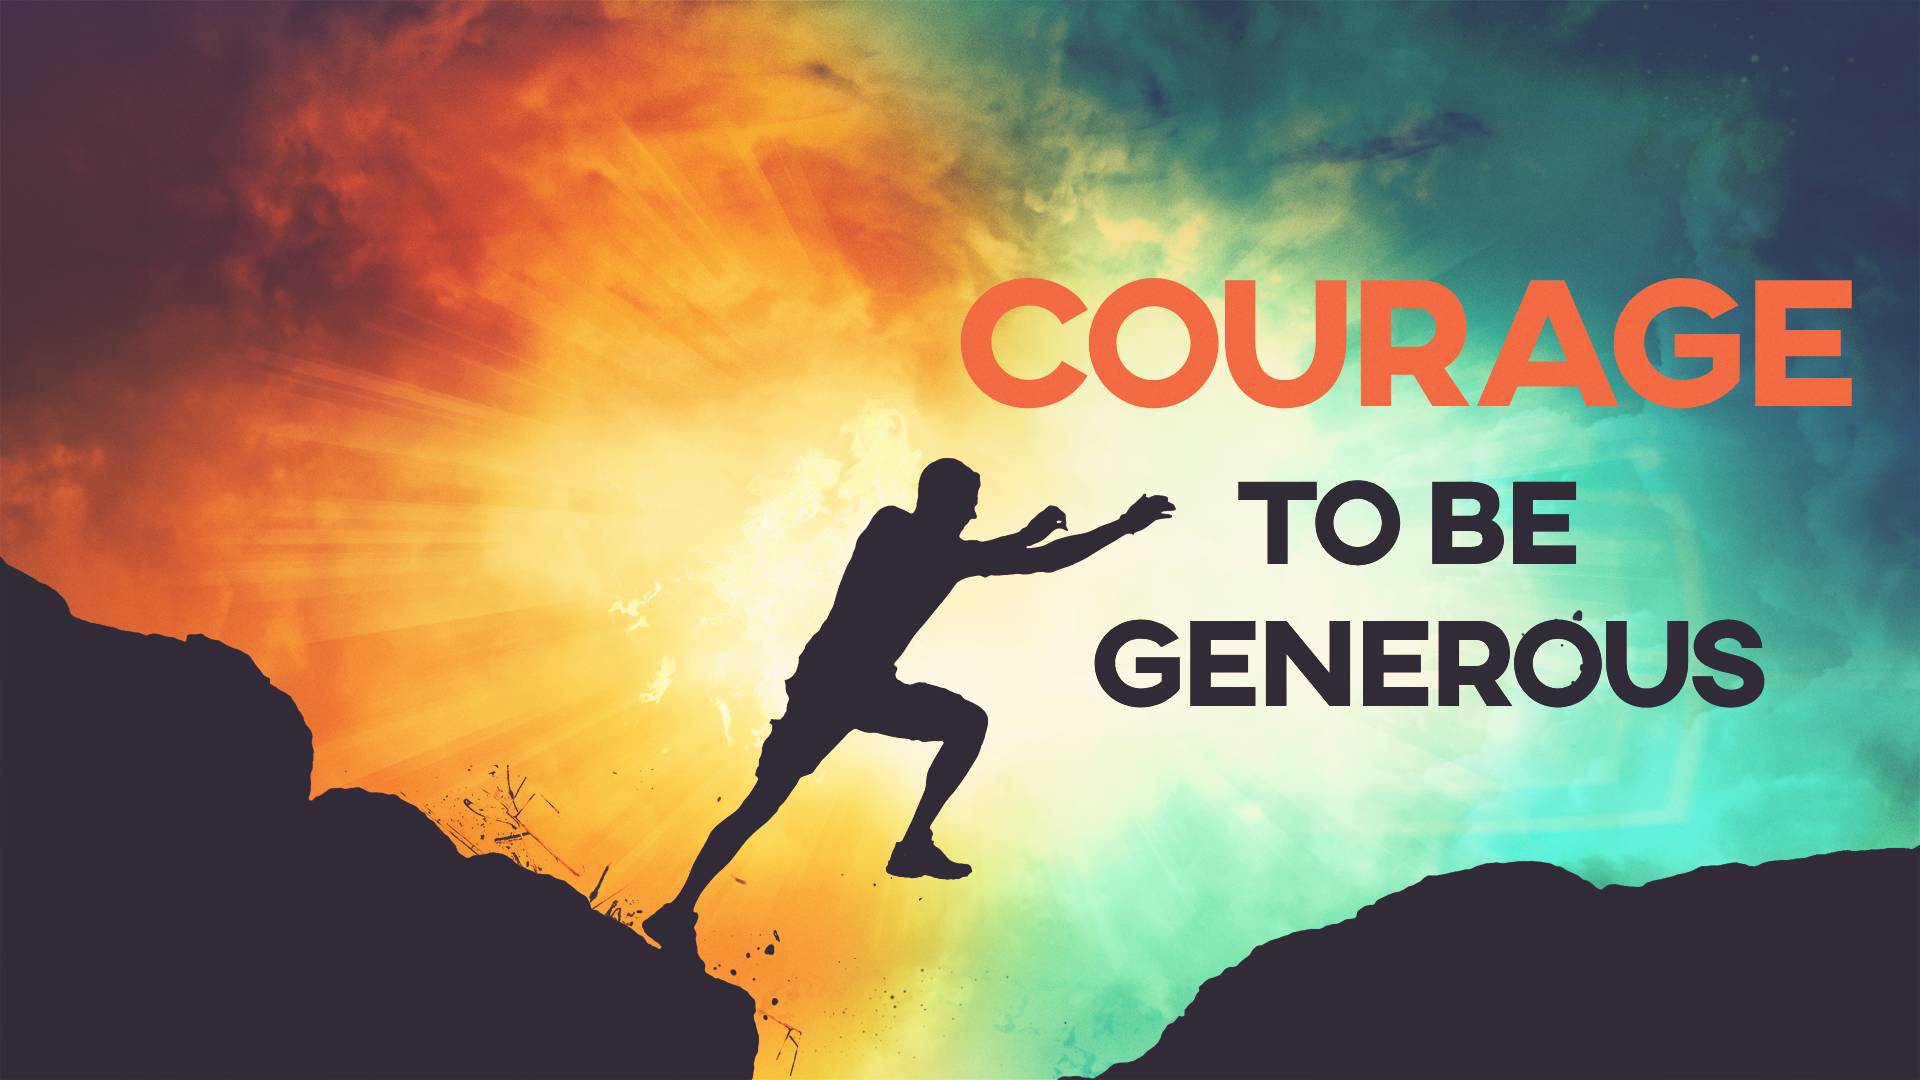 Courage to be Generous